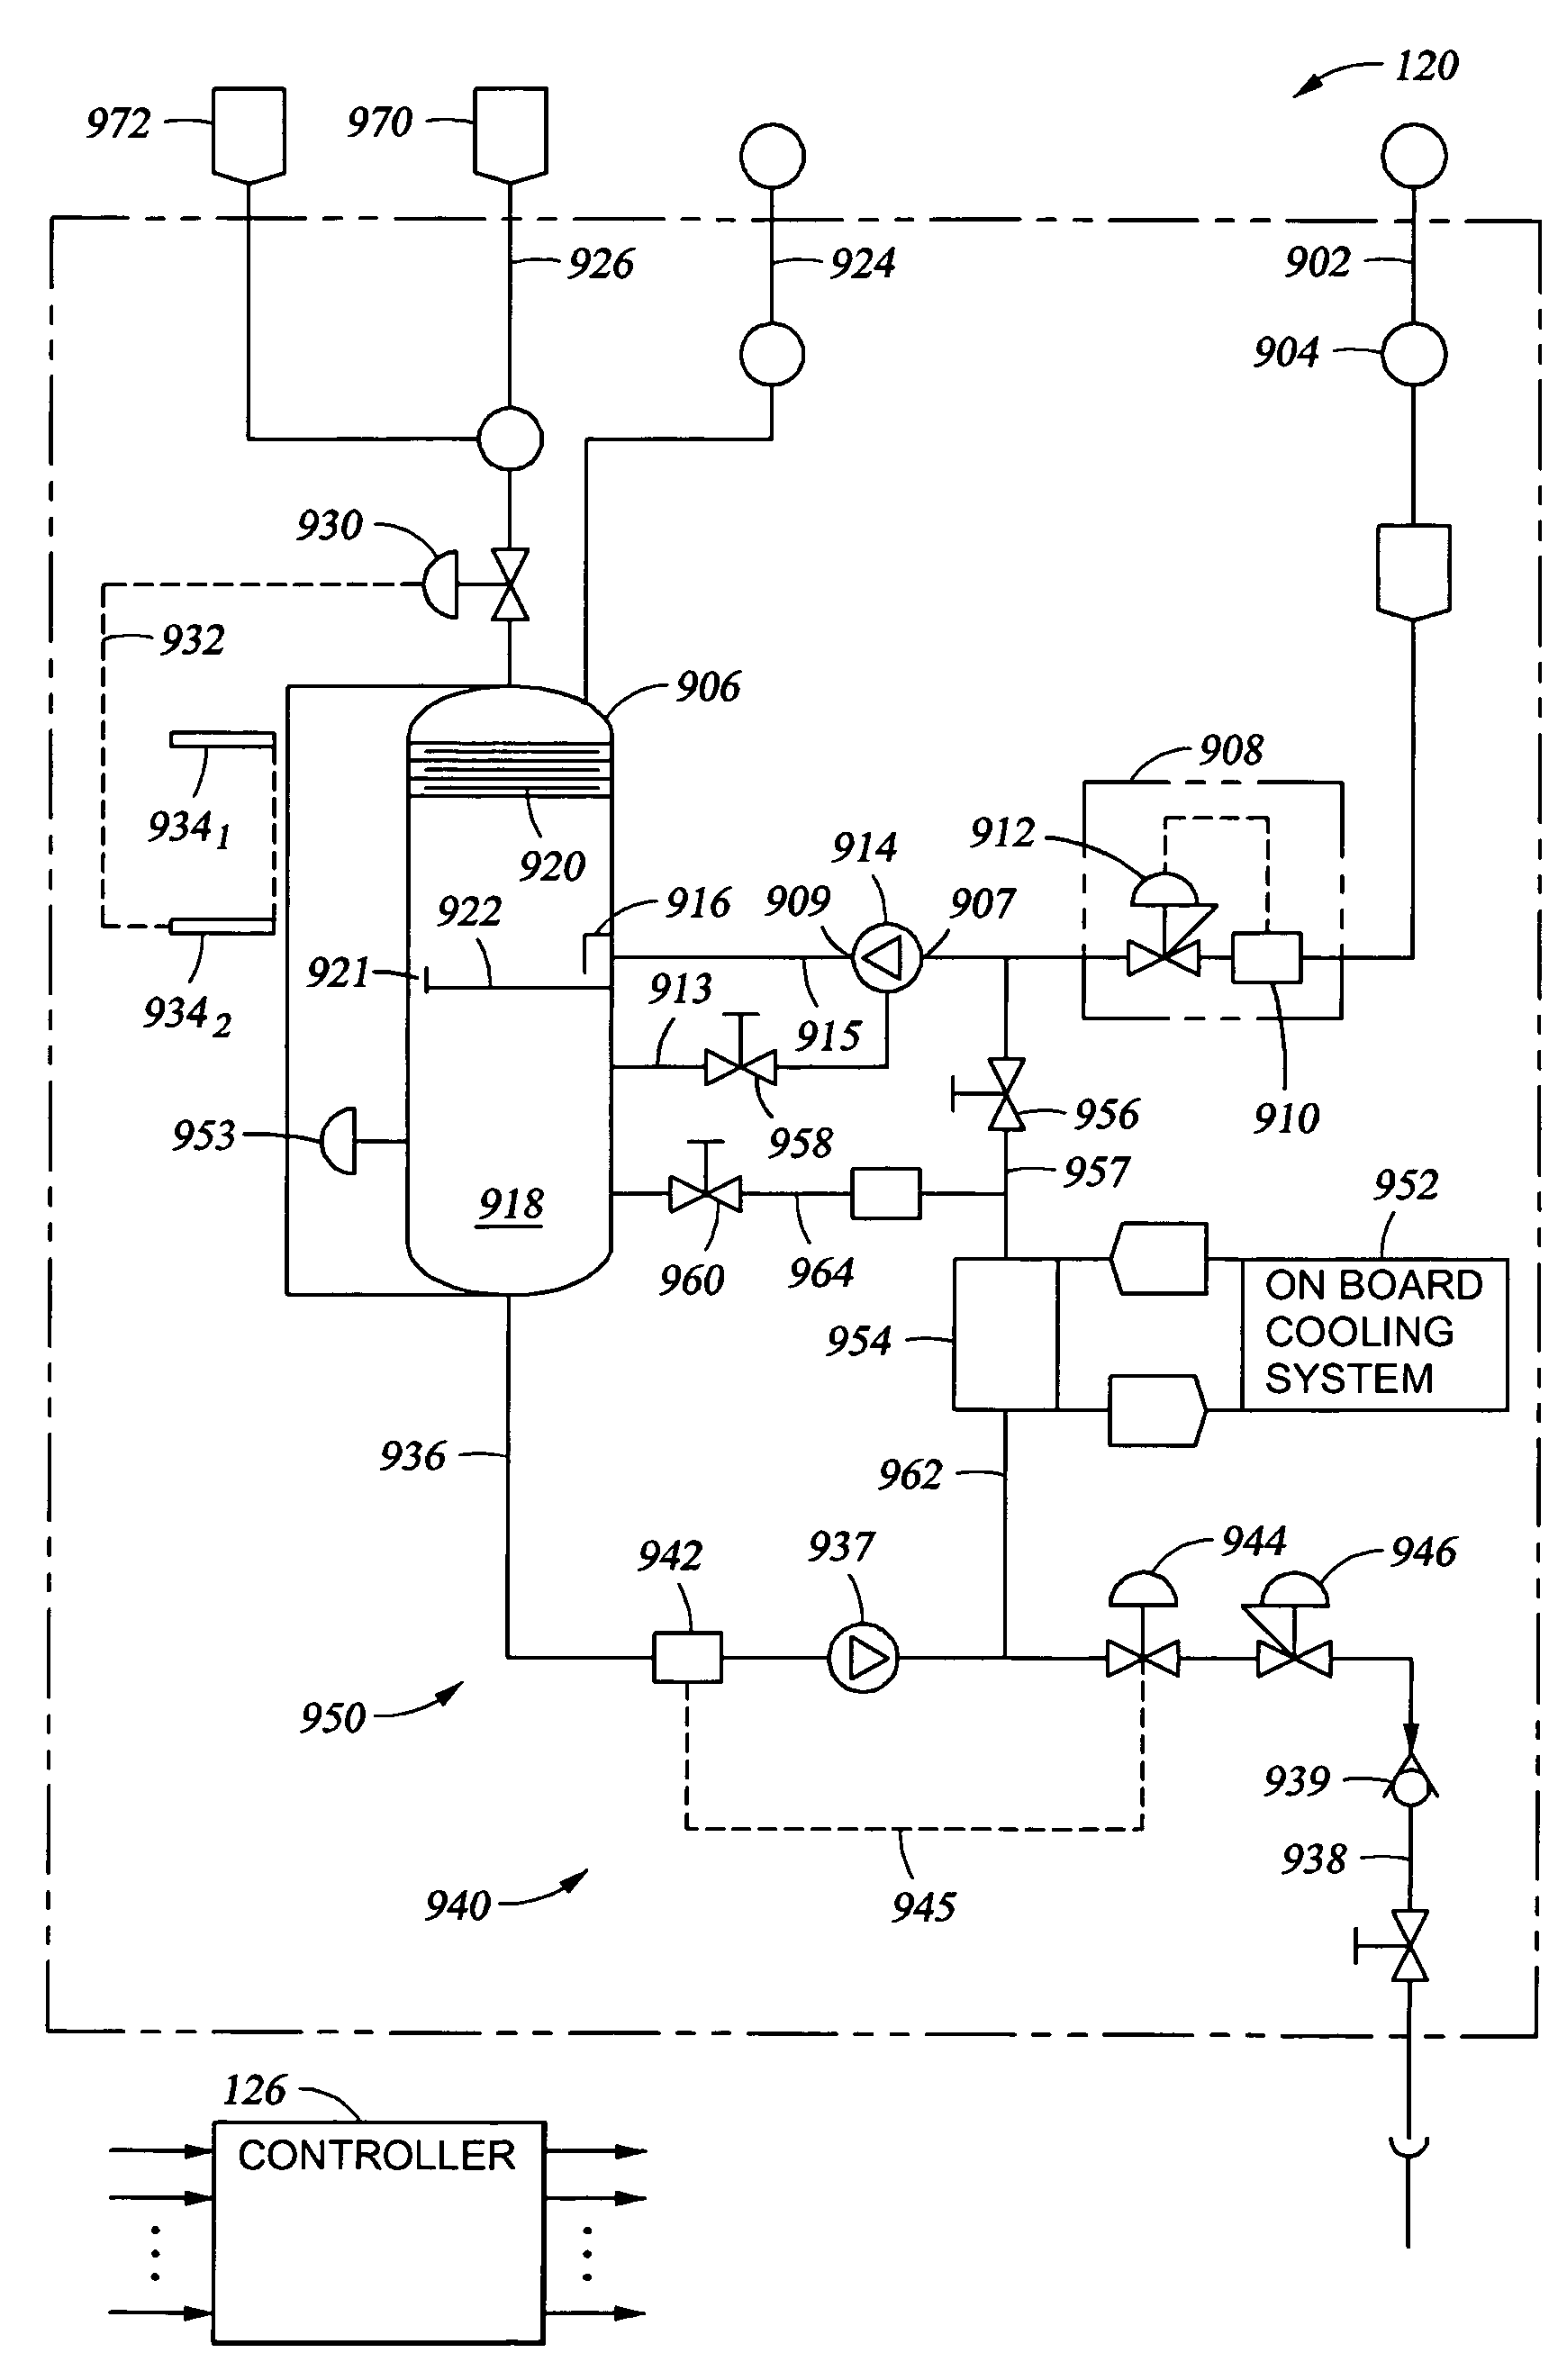 Systems and methods for managing fluids using a liquid ring pump